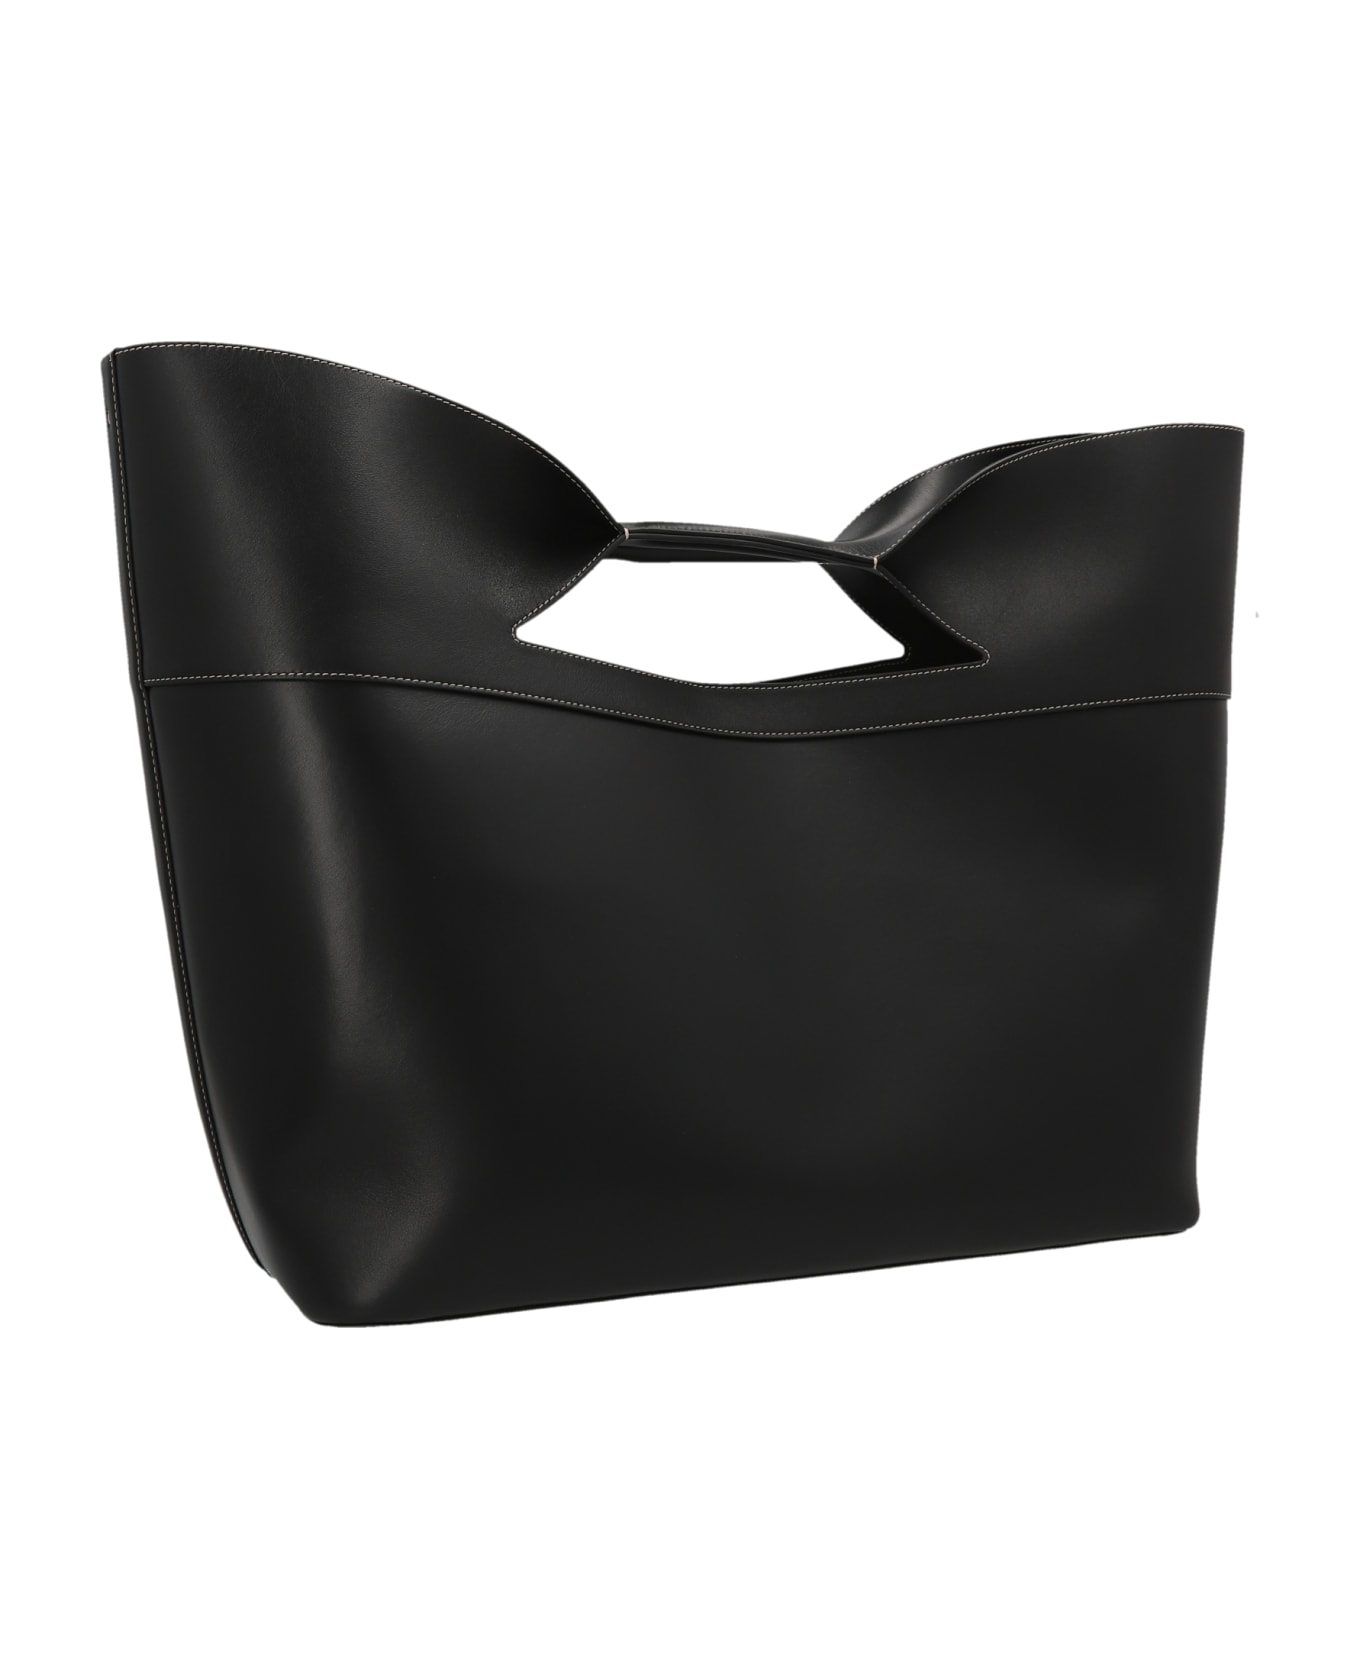 Alexander McQueen The Bow Leather Bag - Black